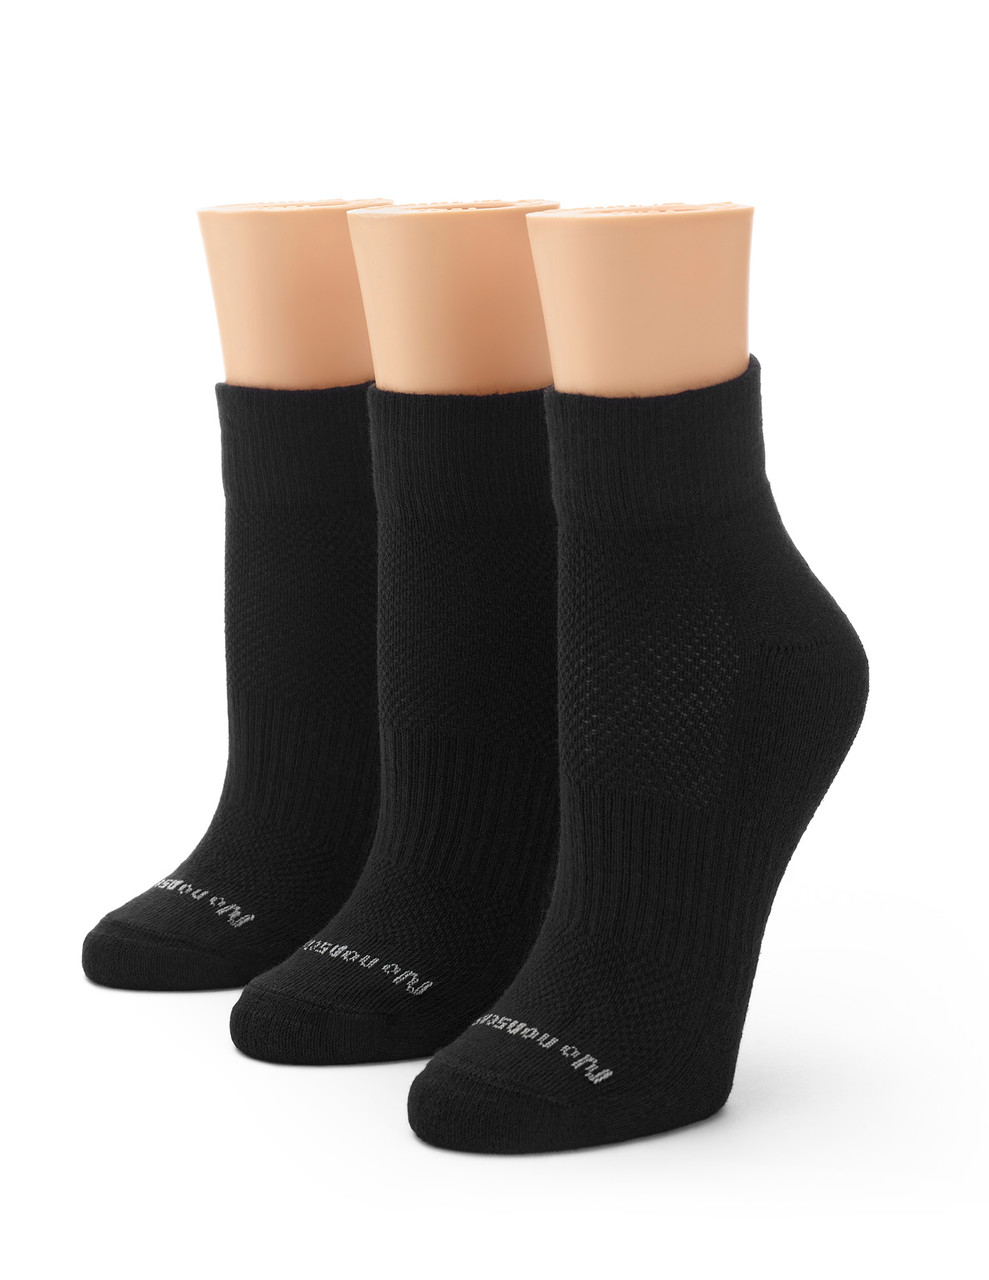 No Nonsense Soft and Breathable No Show Women's Socks, 3 ct